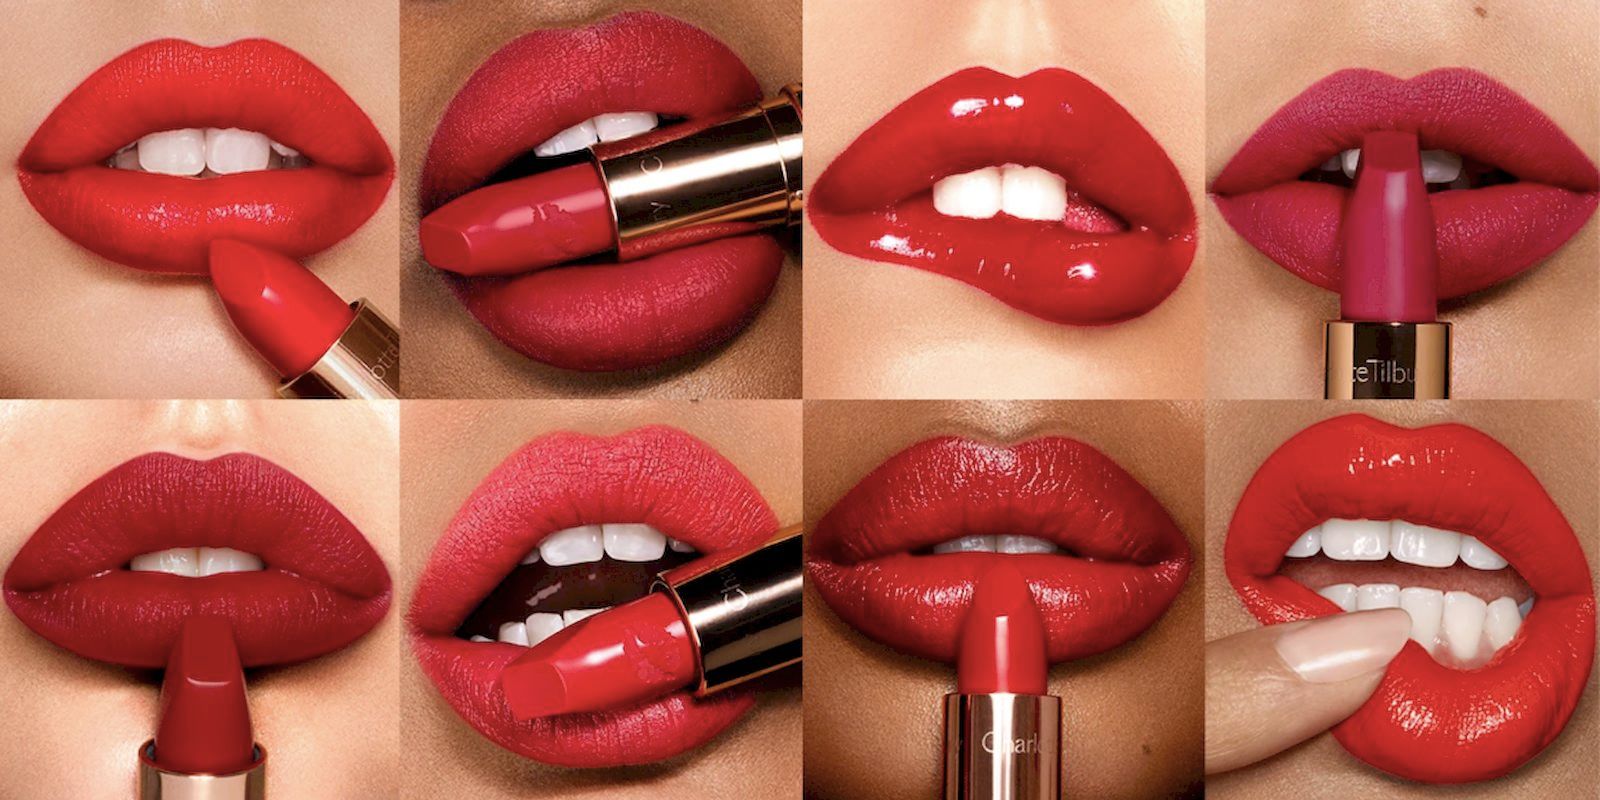 This festive season, let your lips go red and bold